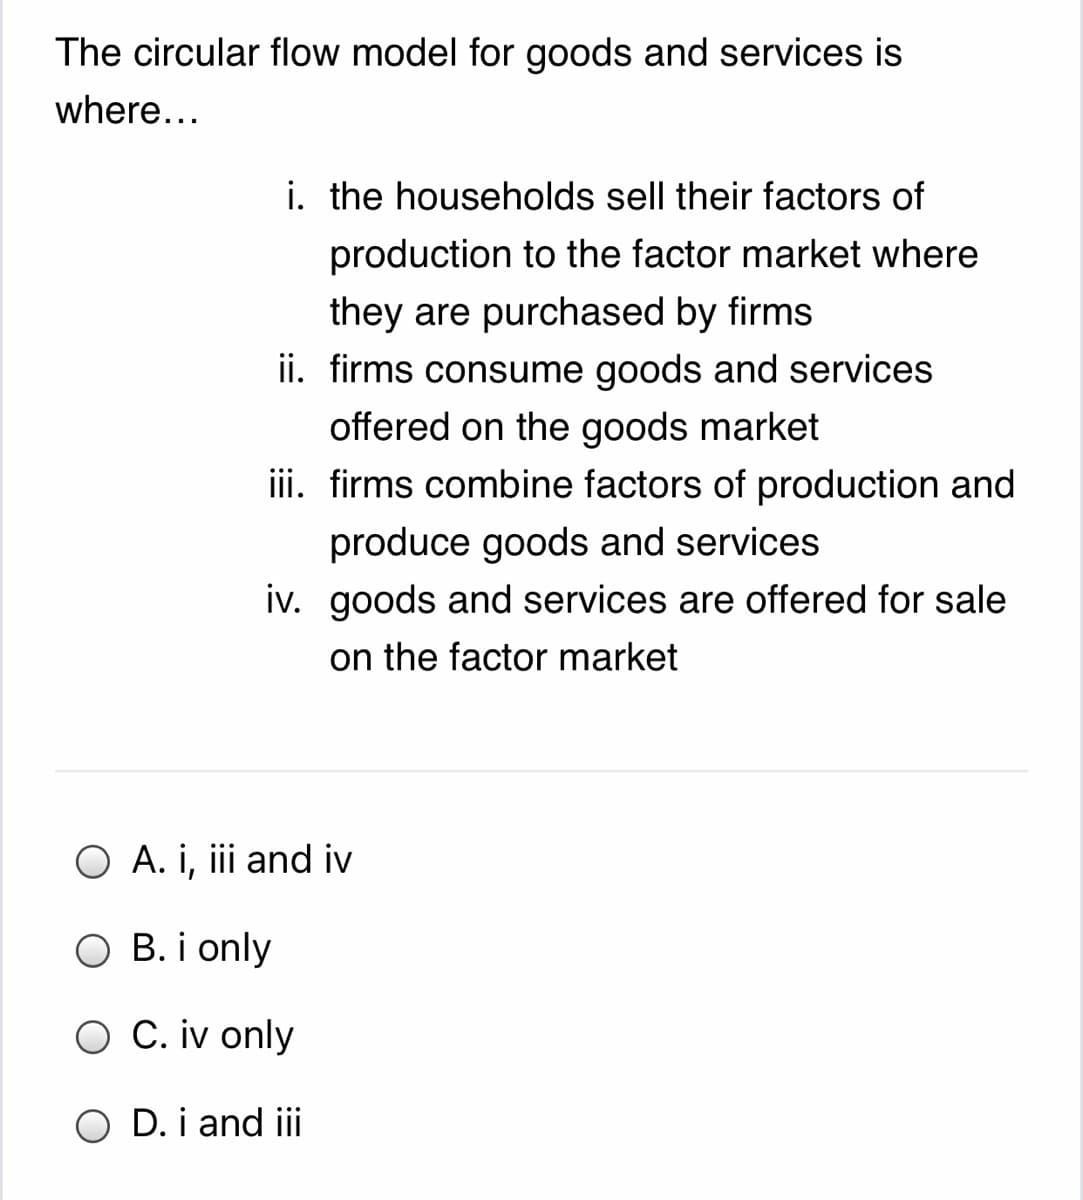 The circular flow model for goods and services is
where...
i. the households sell their factors of
production to the factor market where
they are purchased by firms
ii. firms consume goods and services
offered on the goods market
iii. firms combine factors of production and
produce goods and services
iv. goods and services are offered for sale
on the factor market
O A. i, iii and iv
B. i only
O C. iv only
O D. i and ii
